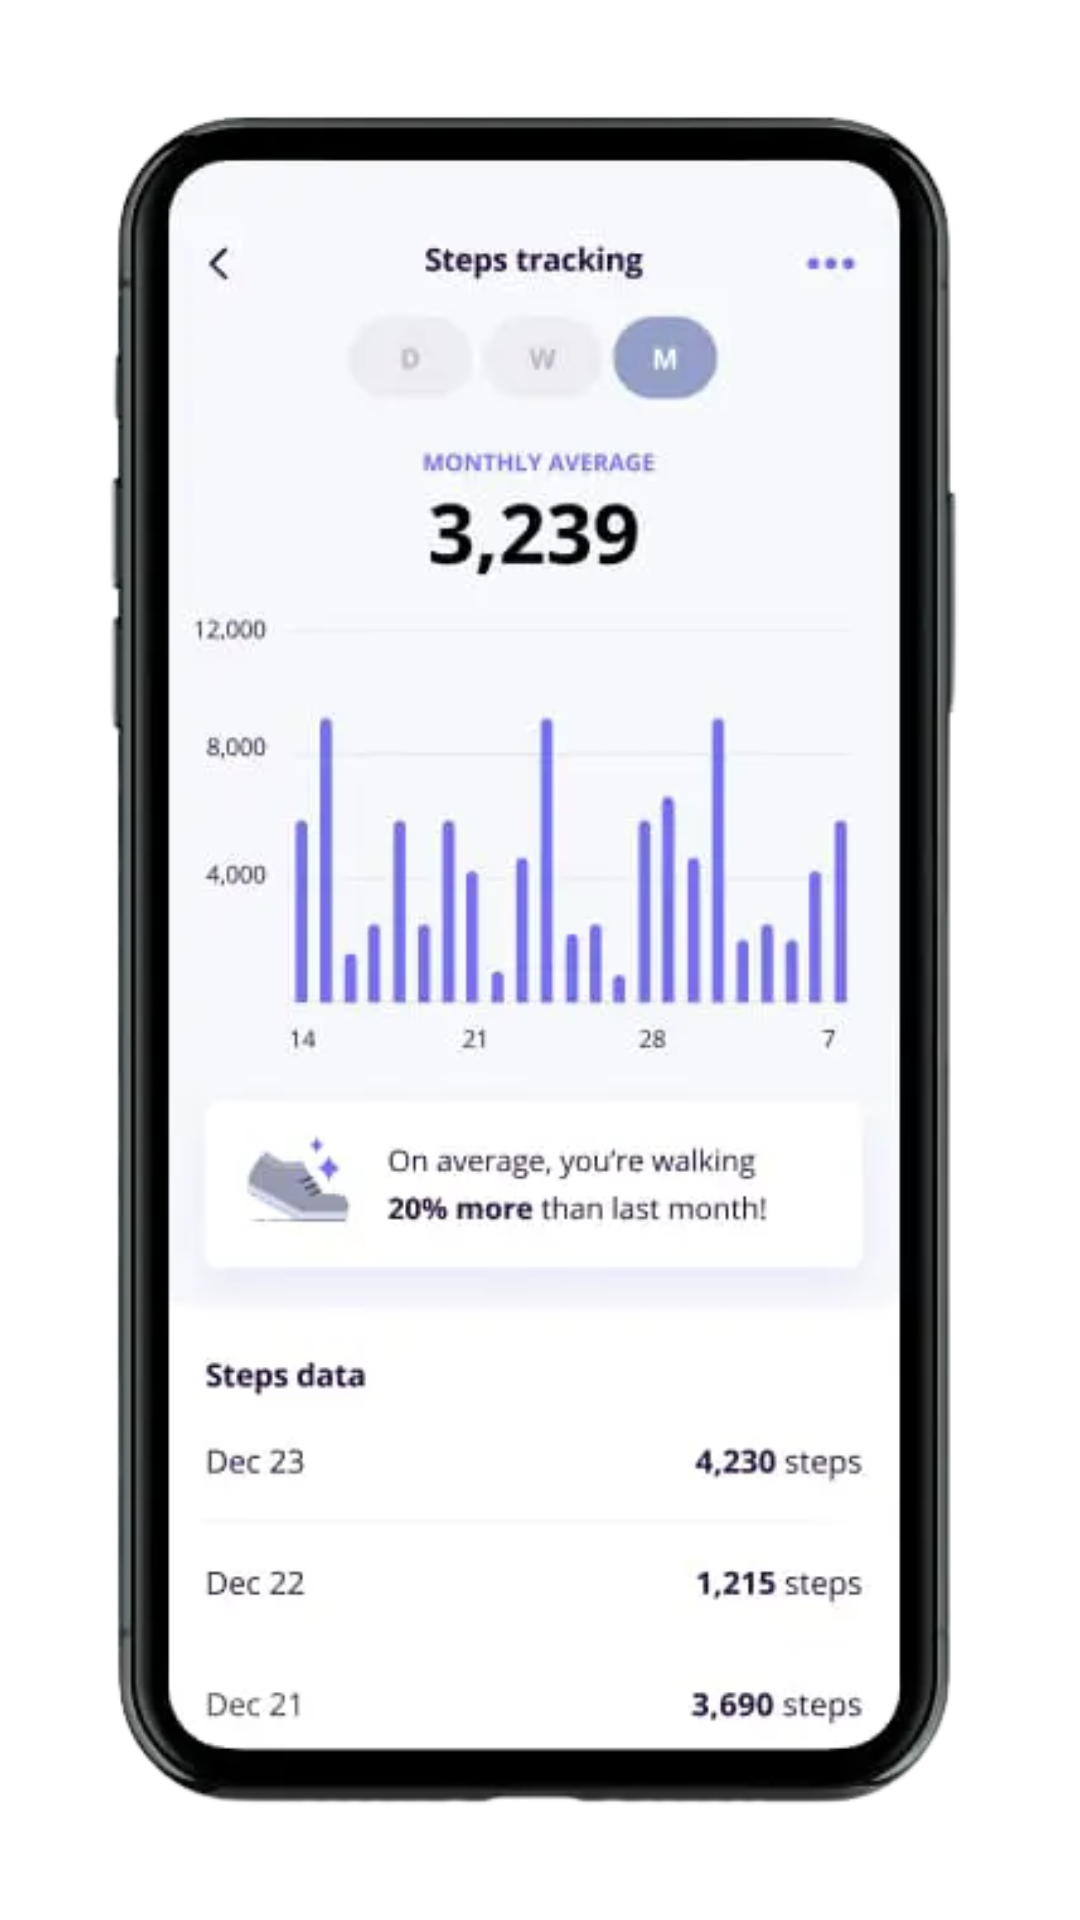 Steps Tracking